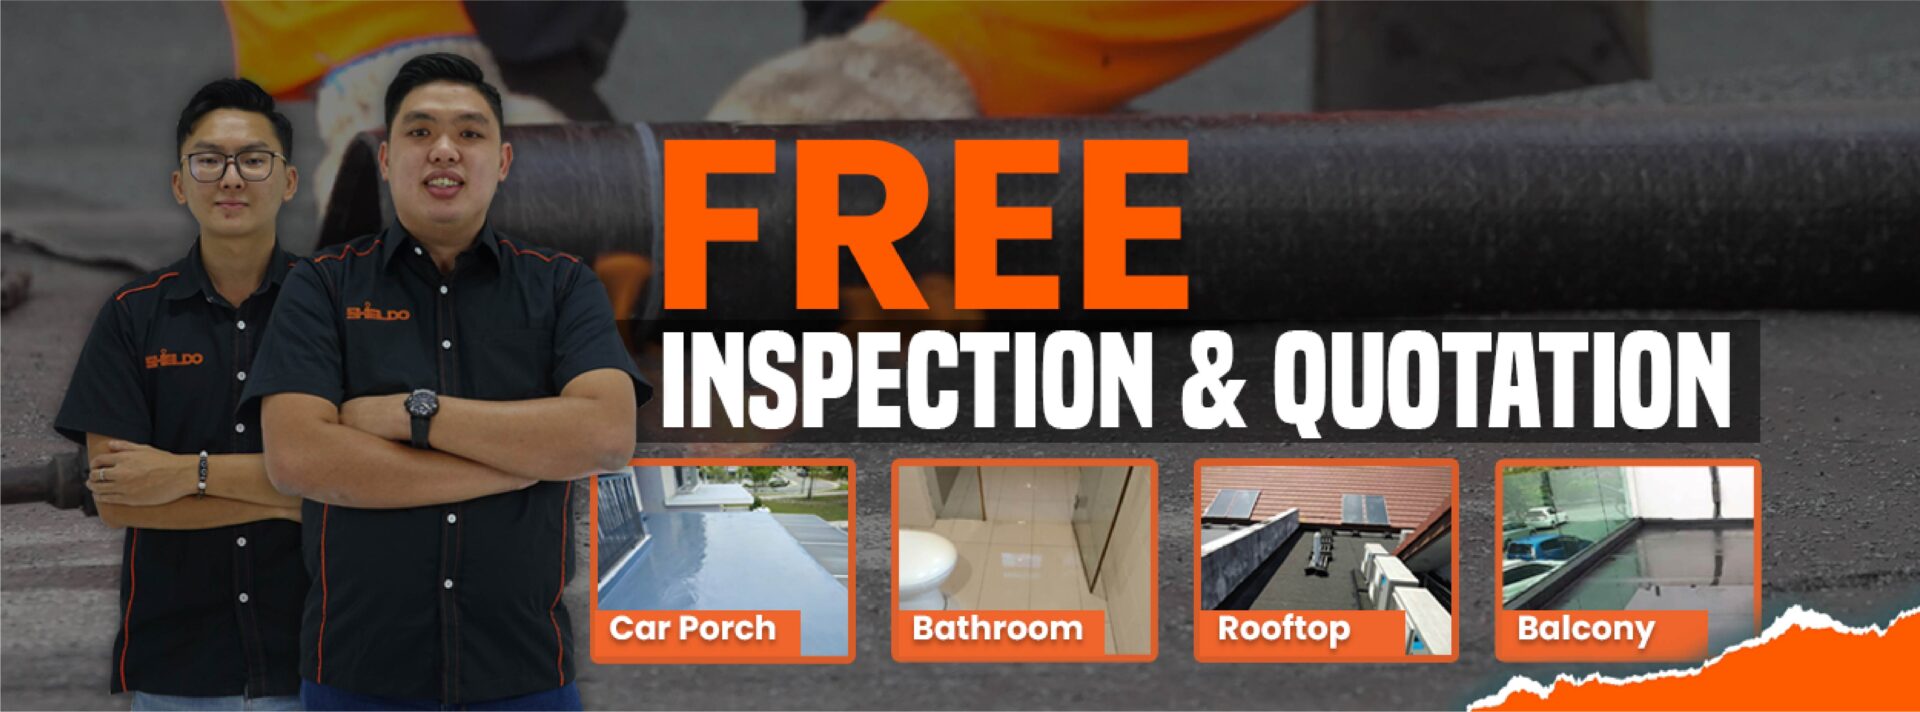 Free Waterproofing Inspection and Quotation - Website